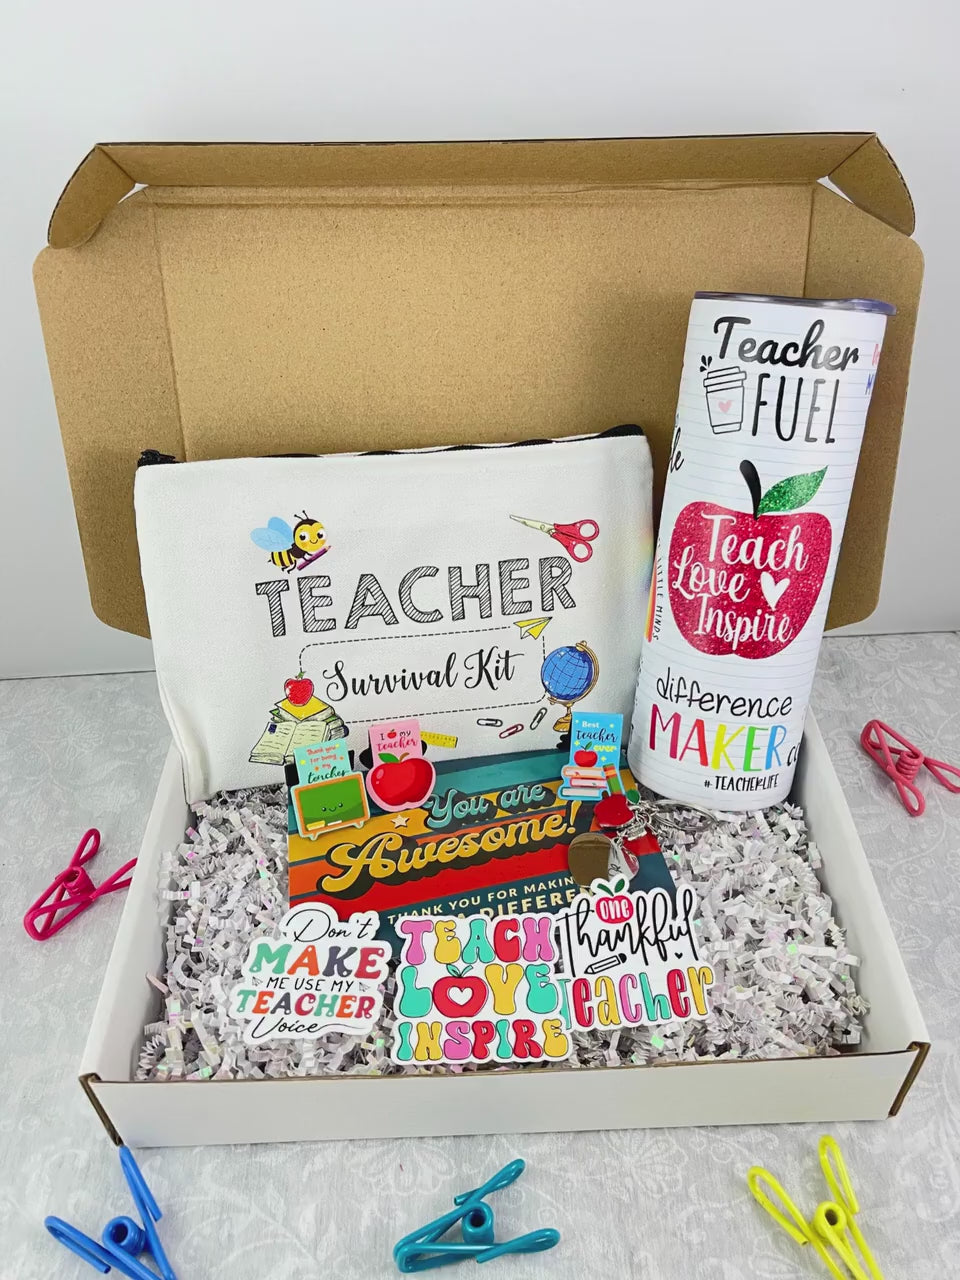 The Best Teacher Gifts - Teacher Appreciation gifts, Holiday gifts and more